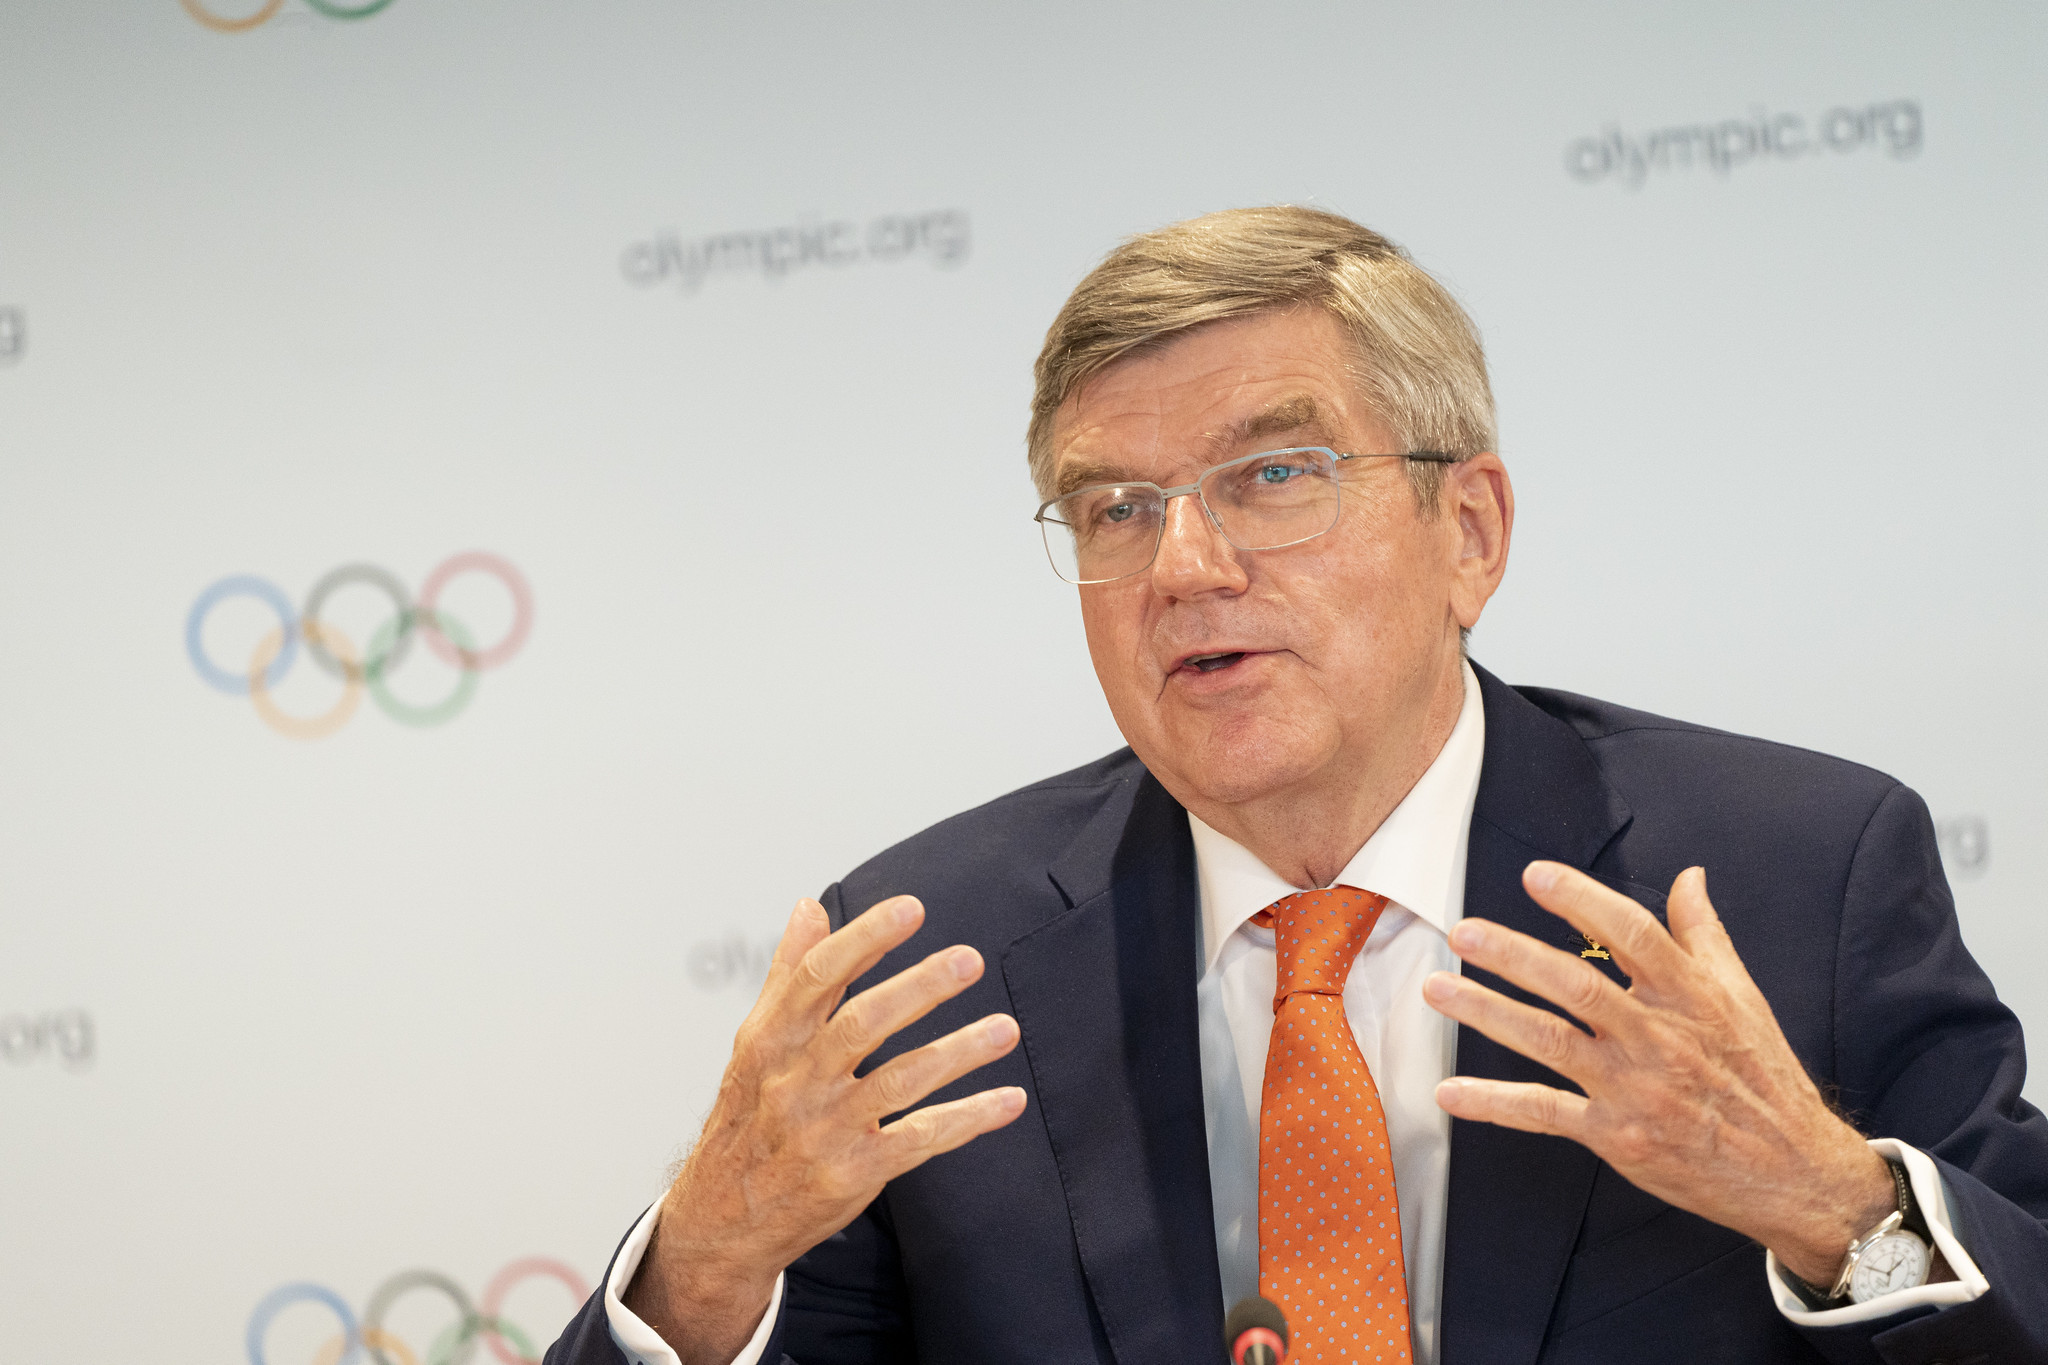 IOC President Thomas Bach pleaded for understanding from athletes affected by changes to qualification for Tokyo 2020 ©IOC